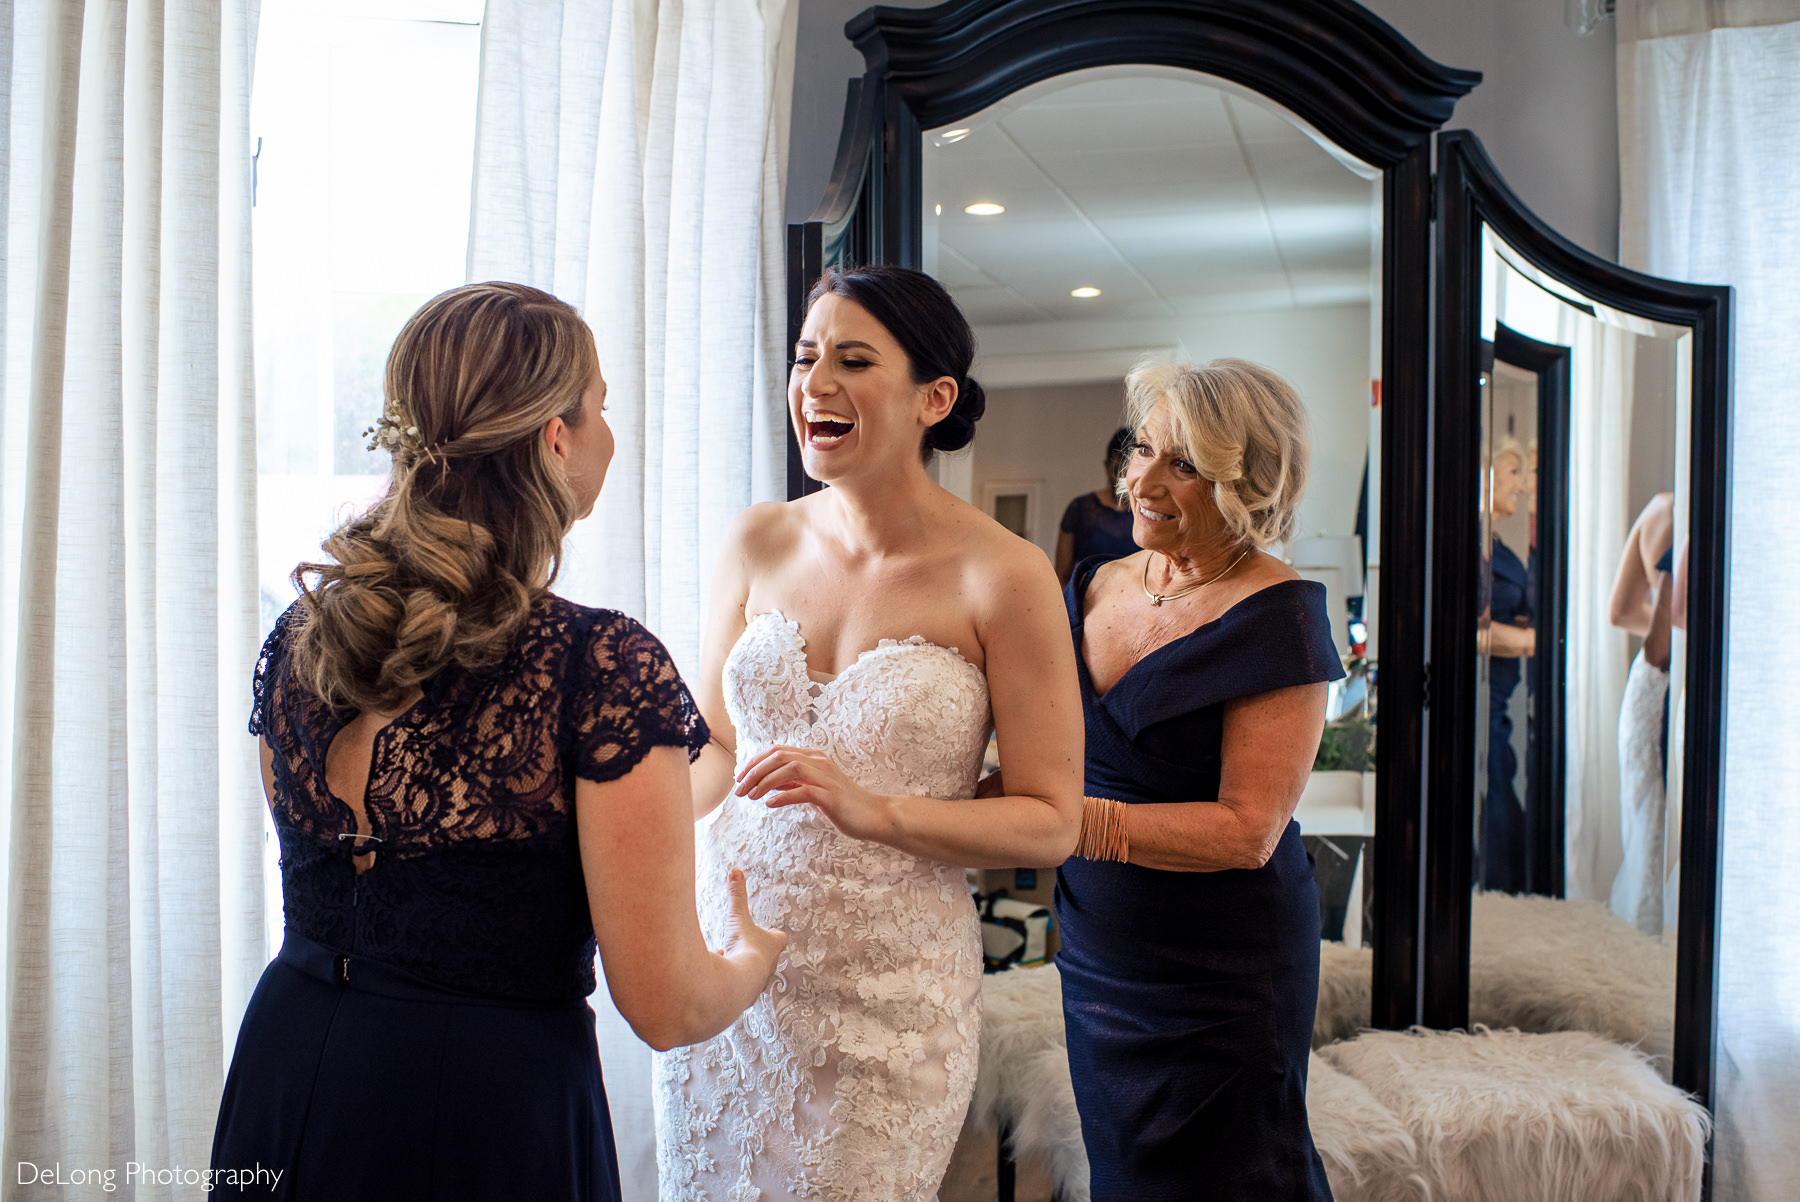 Bride laughing with Maid of Honor while the Mother of the Bride zips up her dress in the bridal suite at Childress Vineyards by Charlotte Wedding Photographers DeLong Photography